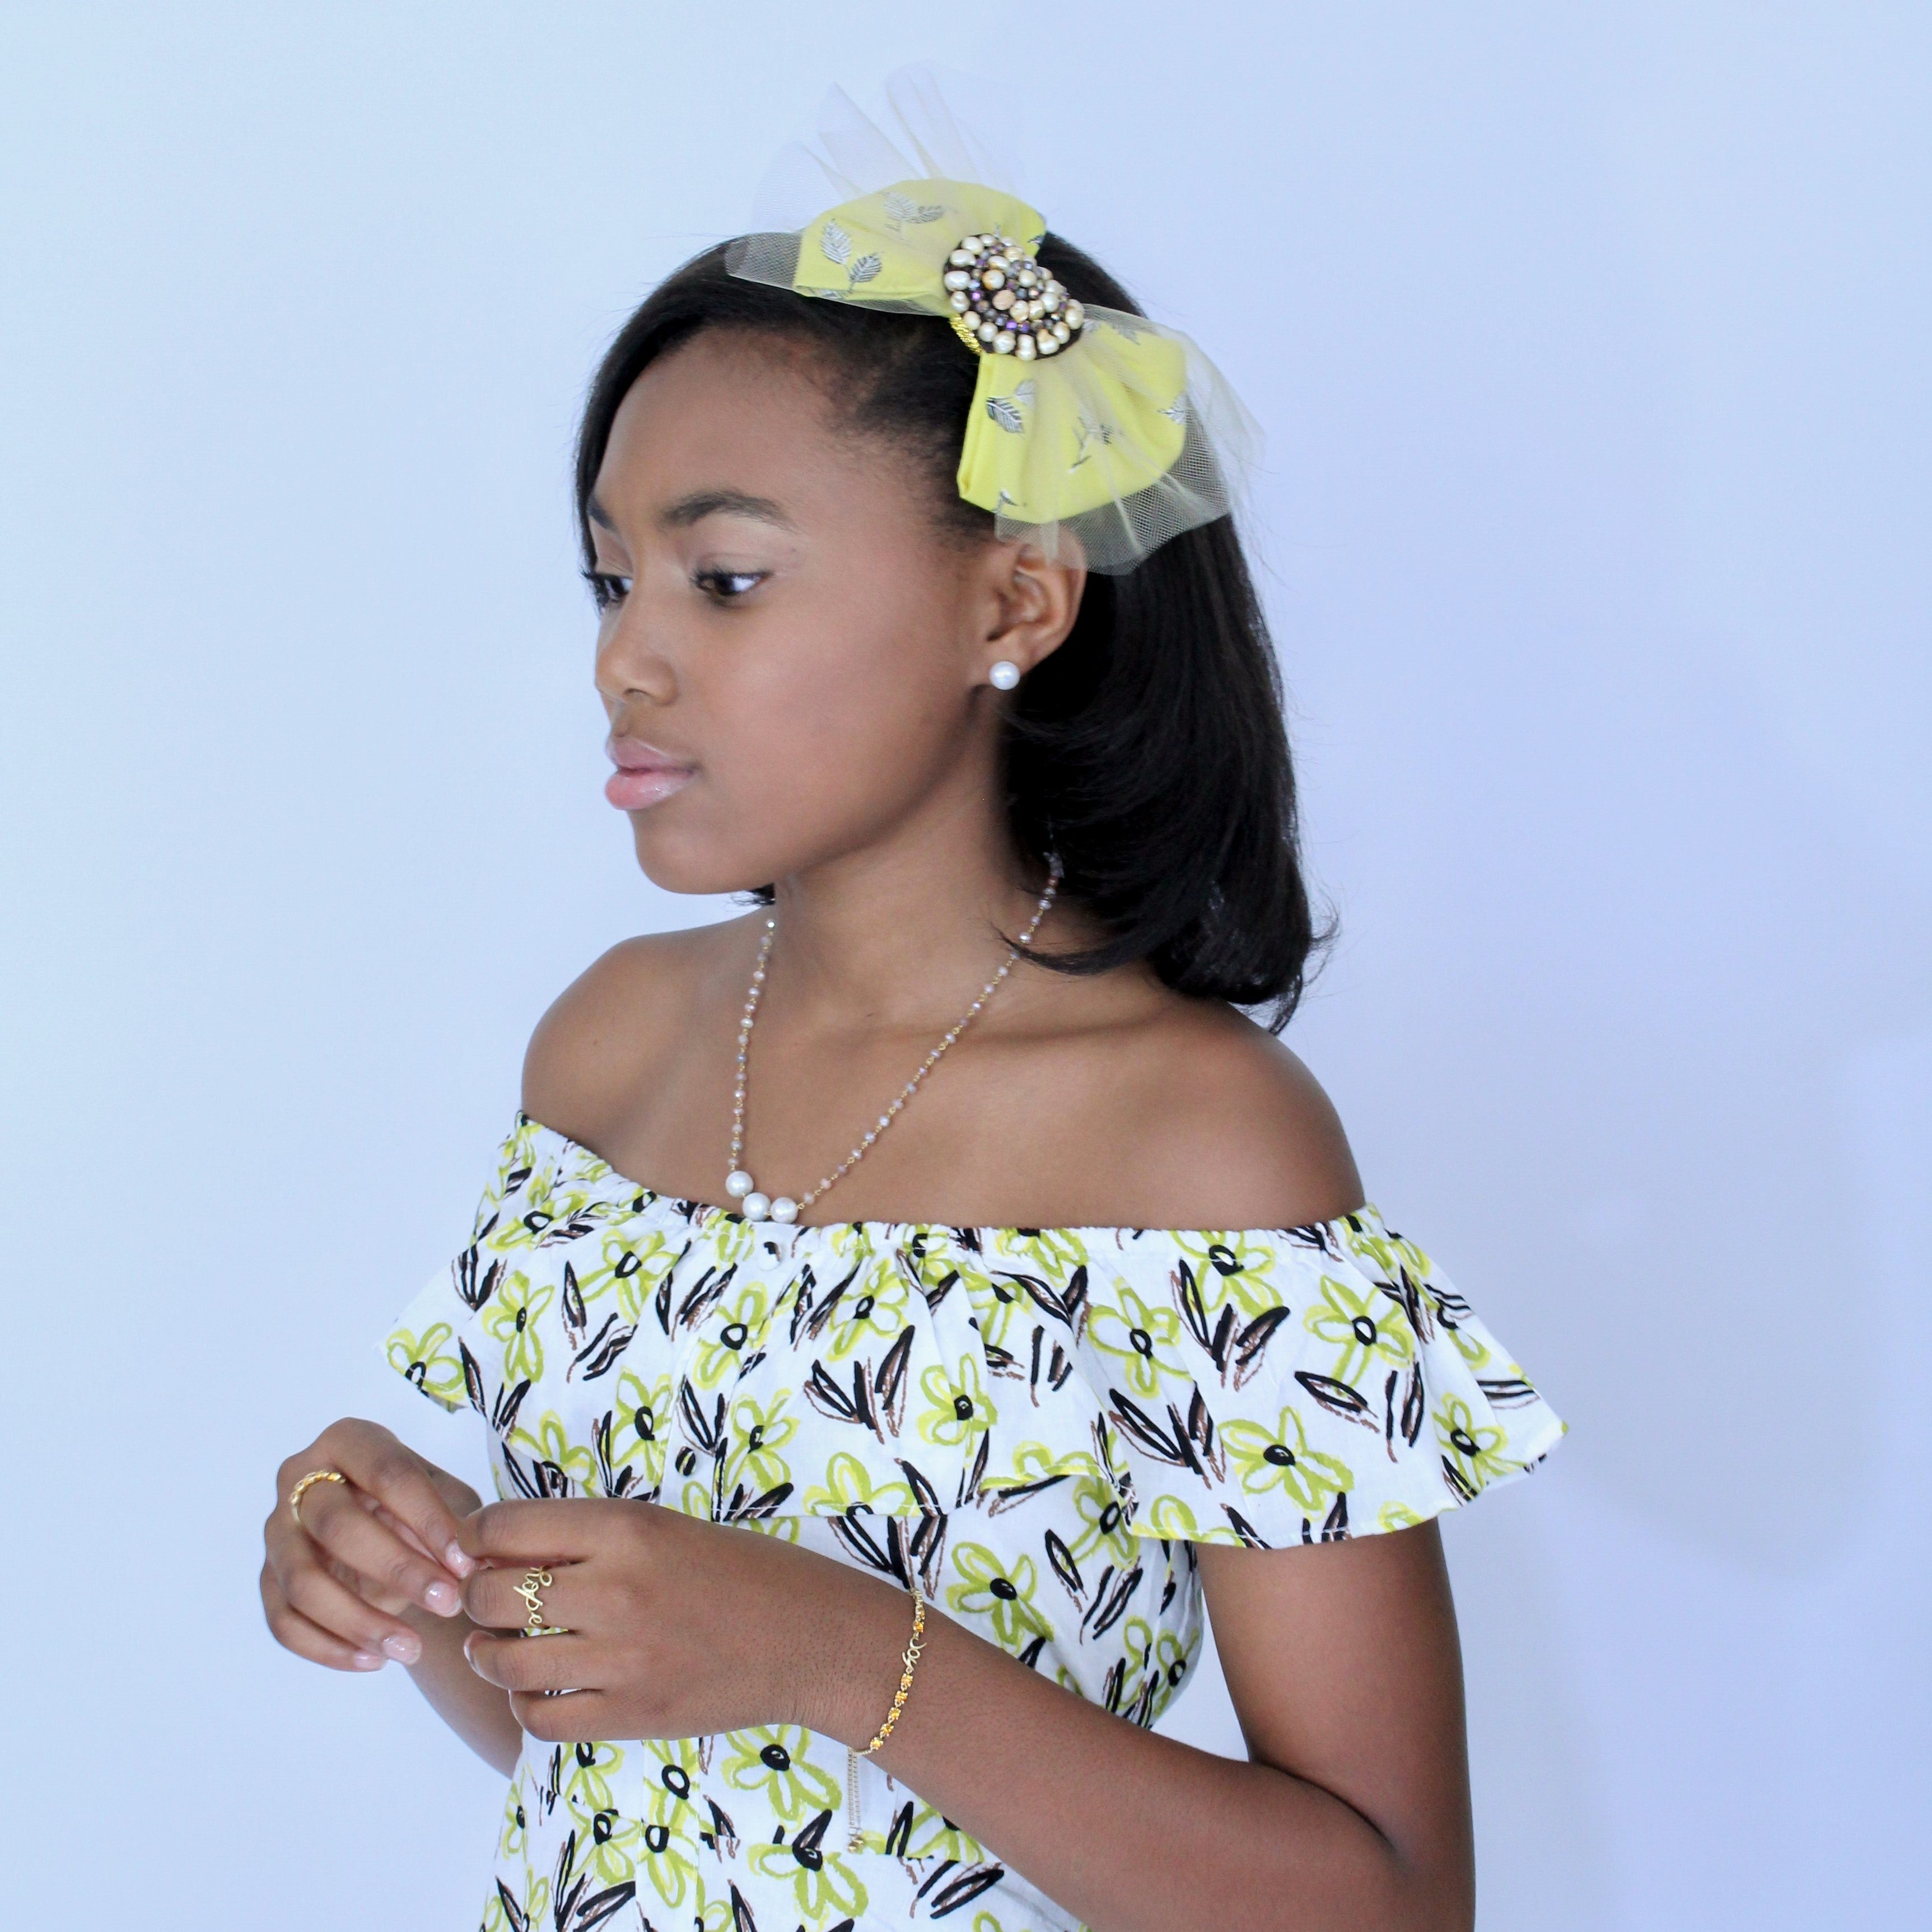 Meaghan Golden Freshwater Pearls Glass Beads & Tulle Headband in Black and Lemon. - Houzz of DVA Boutique